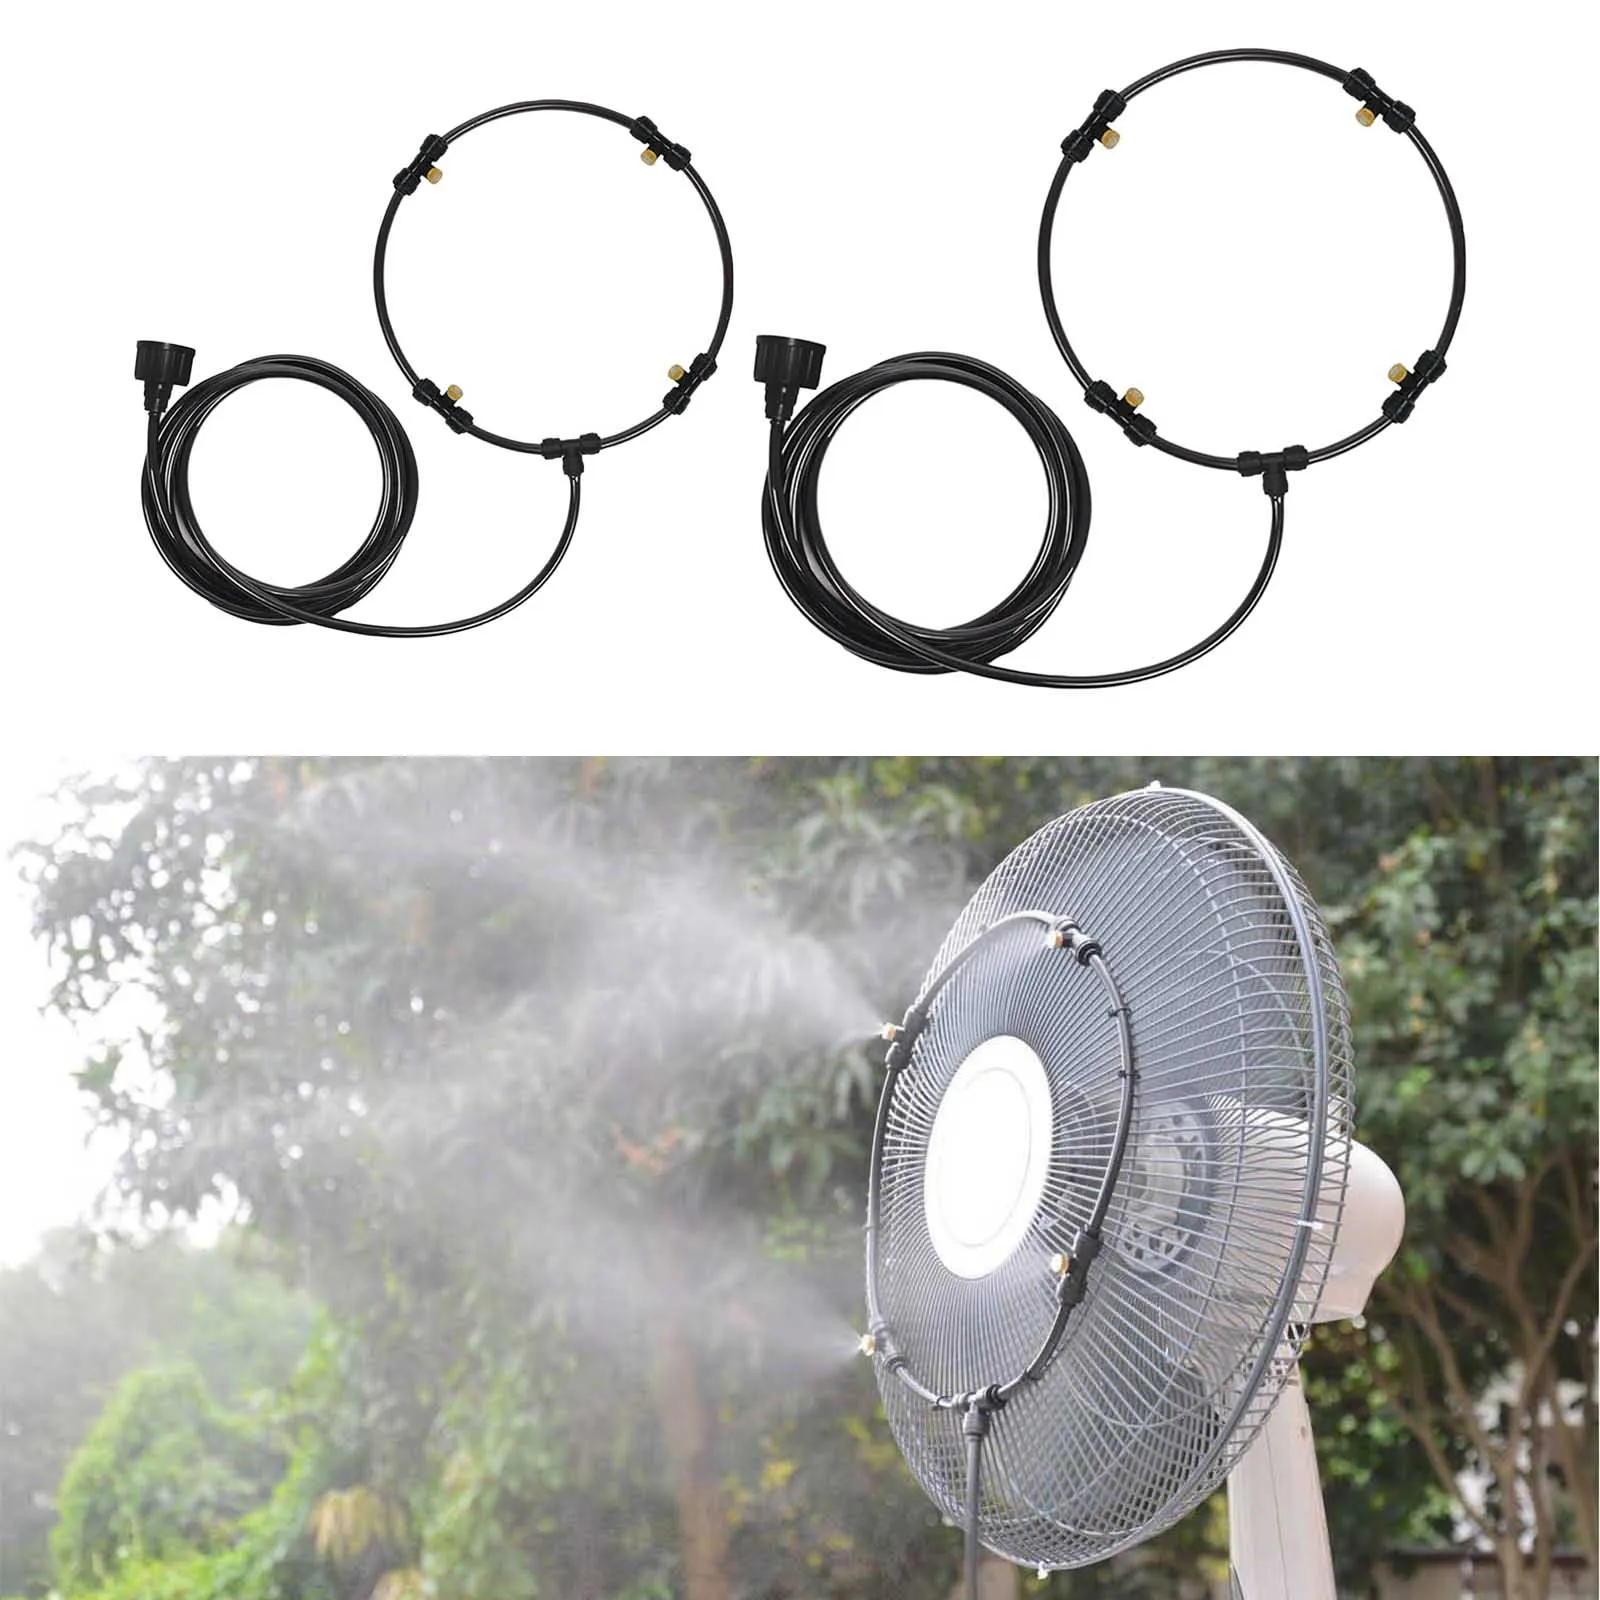 Garden Spray Portable Mist fan Ring 4 spray nozzles water mist fog sprayer cooling system 3m Hose with Brass Nozzles